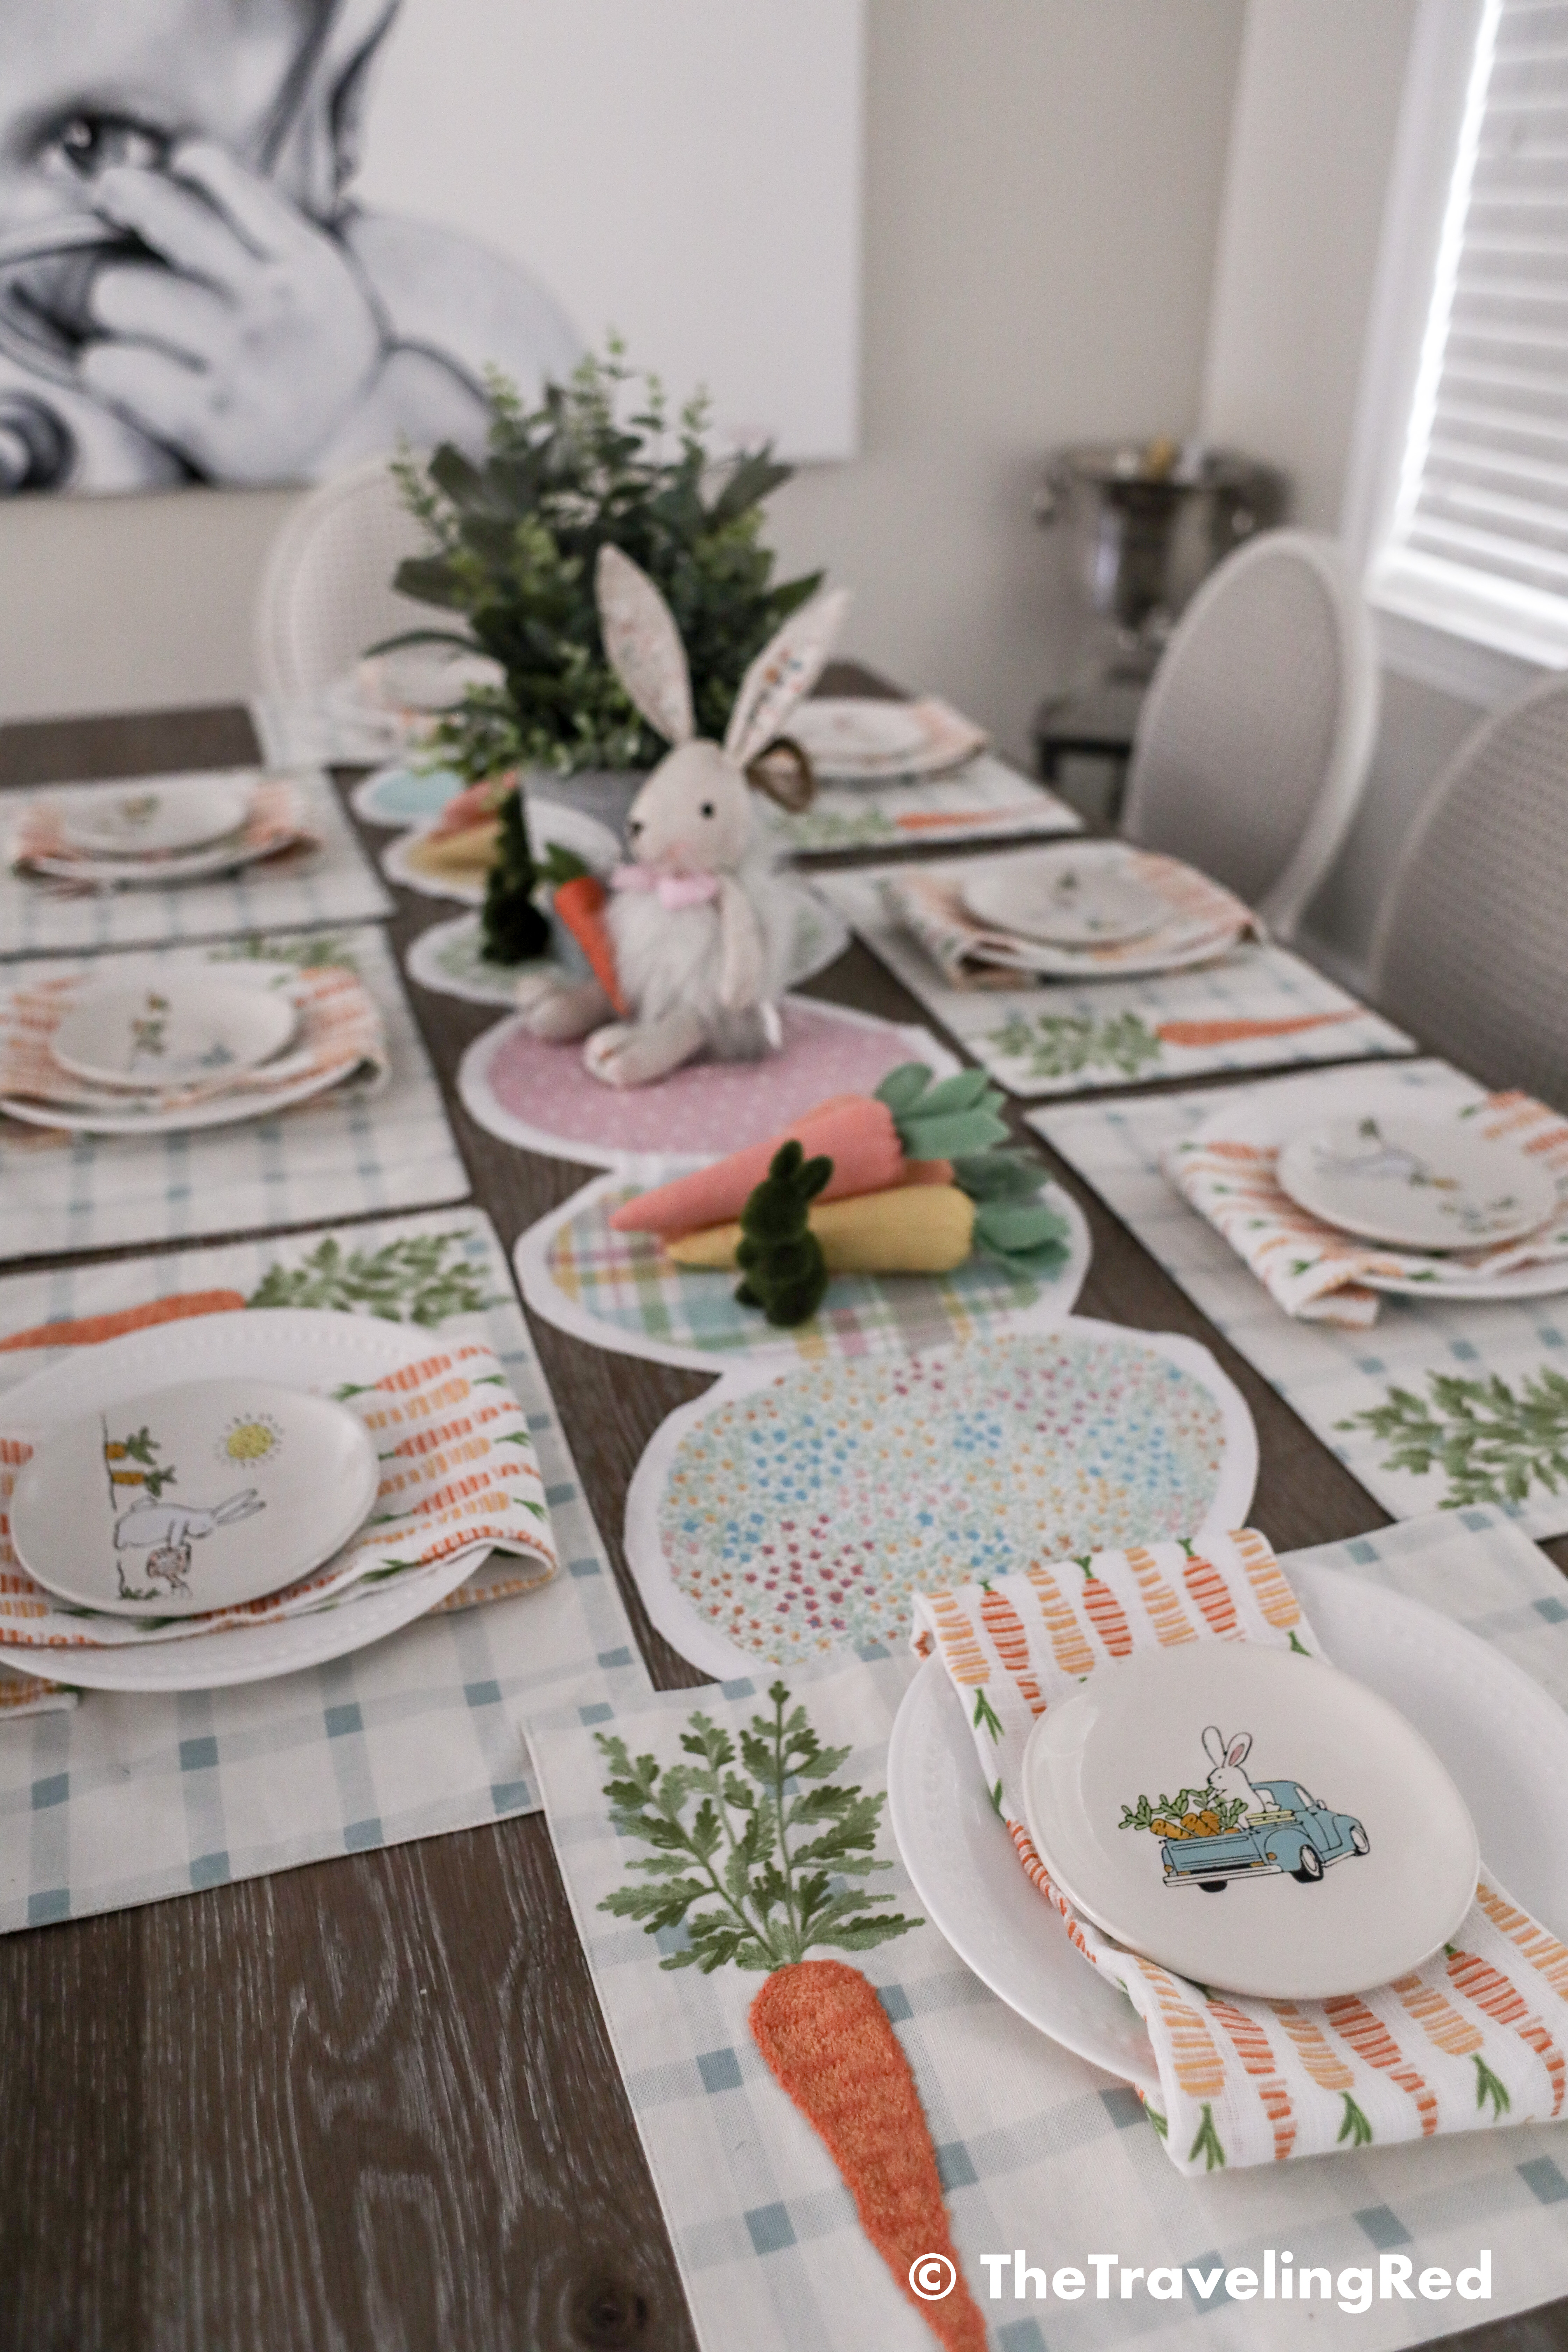 Dining room easter tablescape. Bunnies, carrots, pastels, flowers all for my farmhouse dining room. Dining room seasonal decorations.